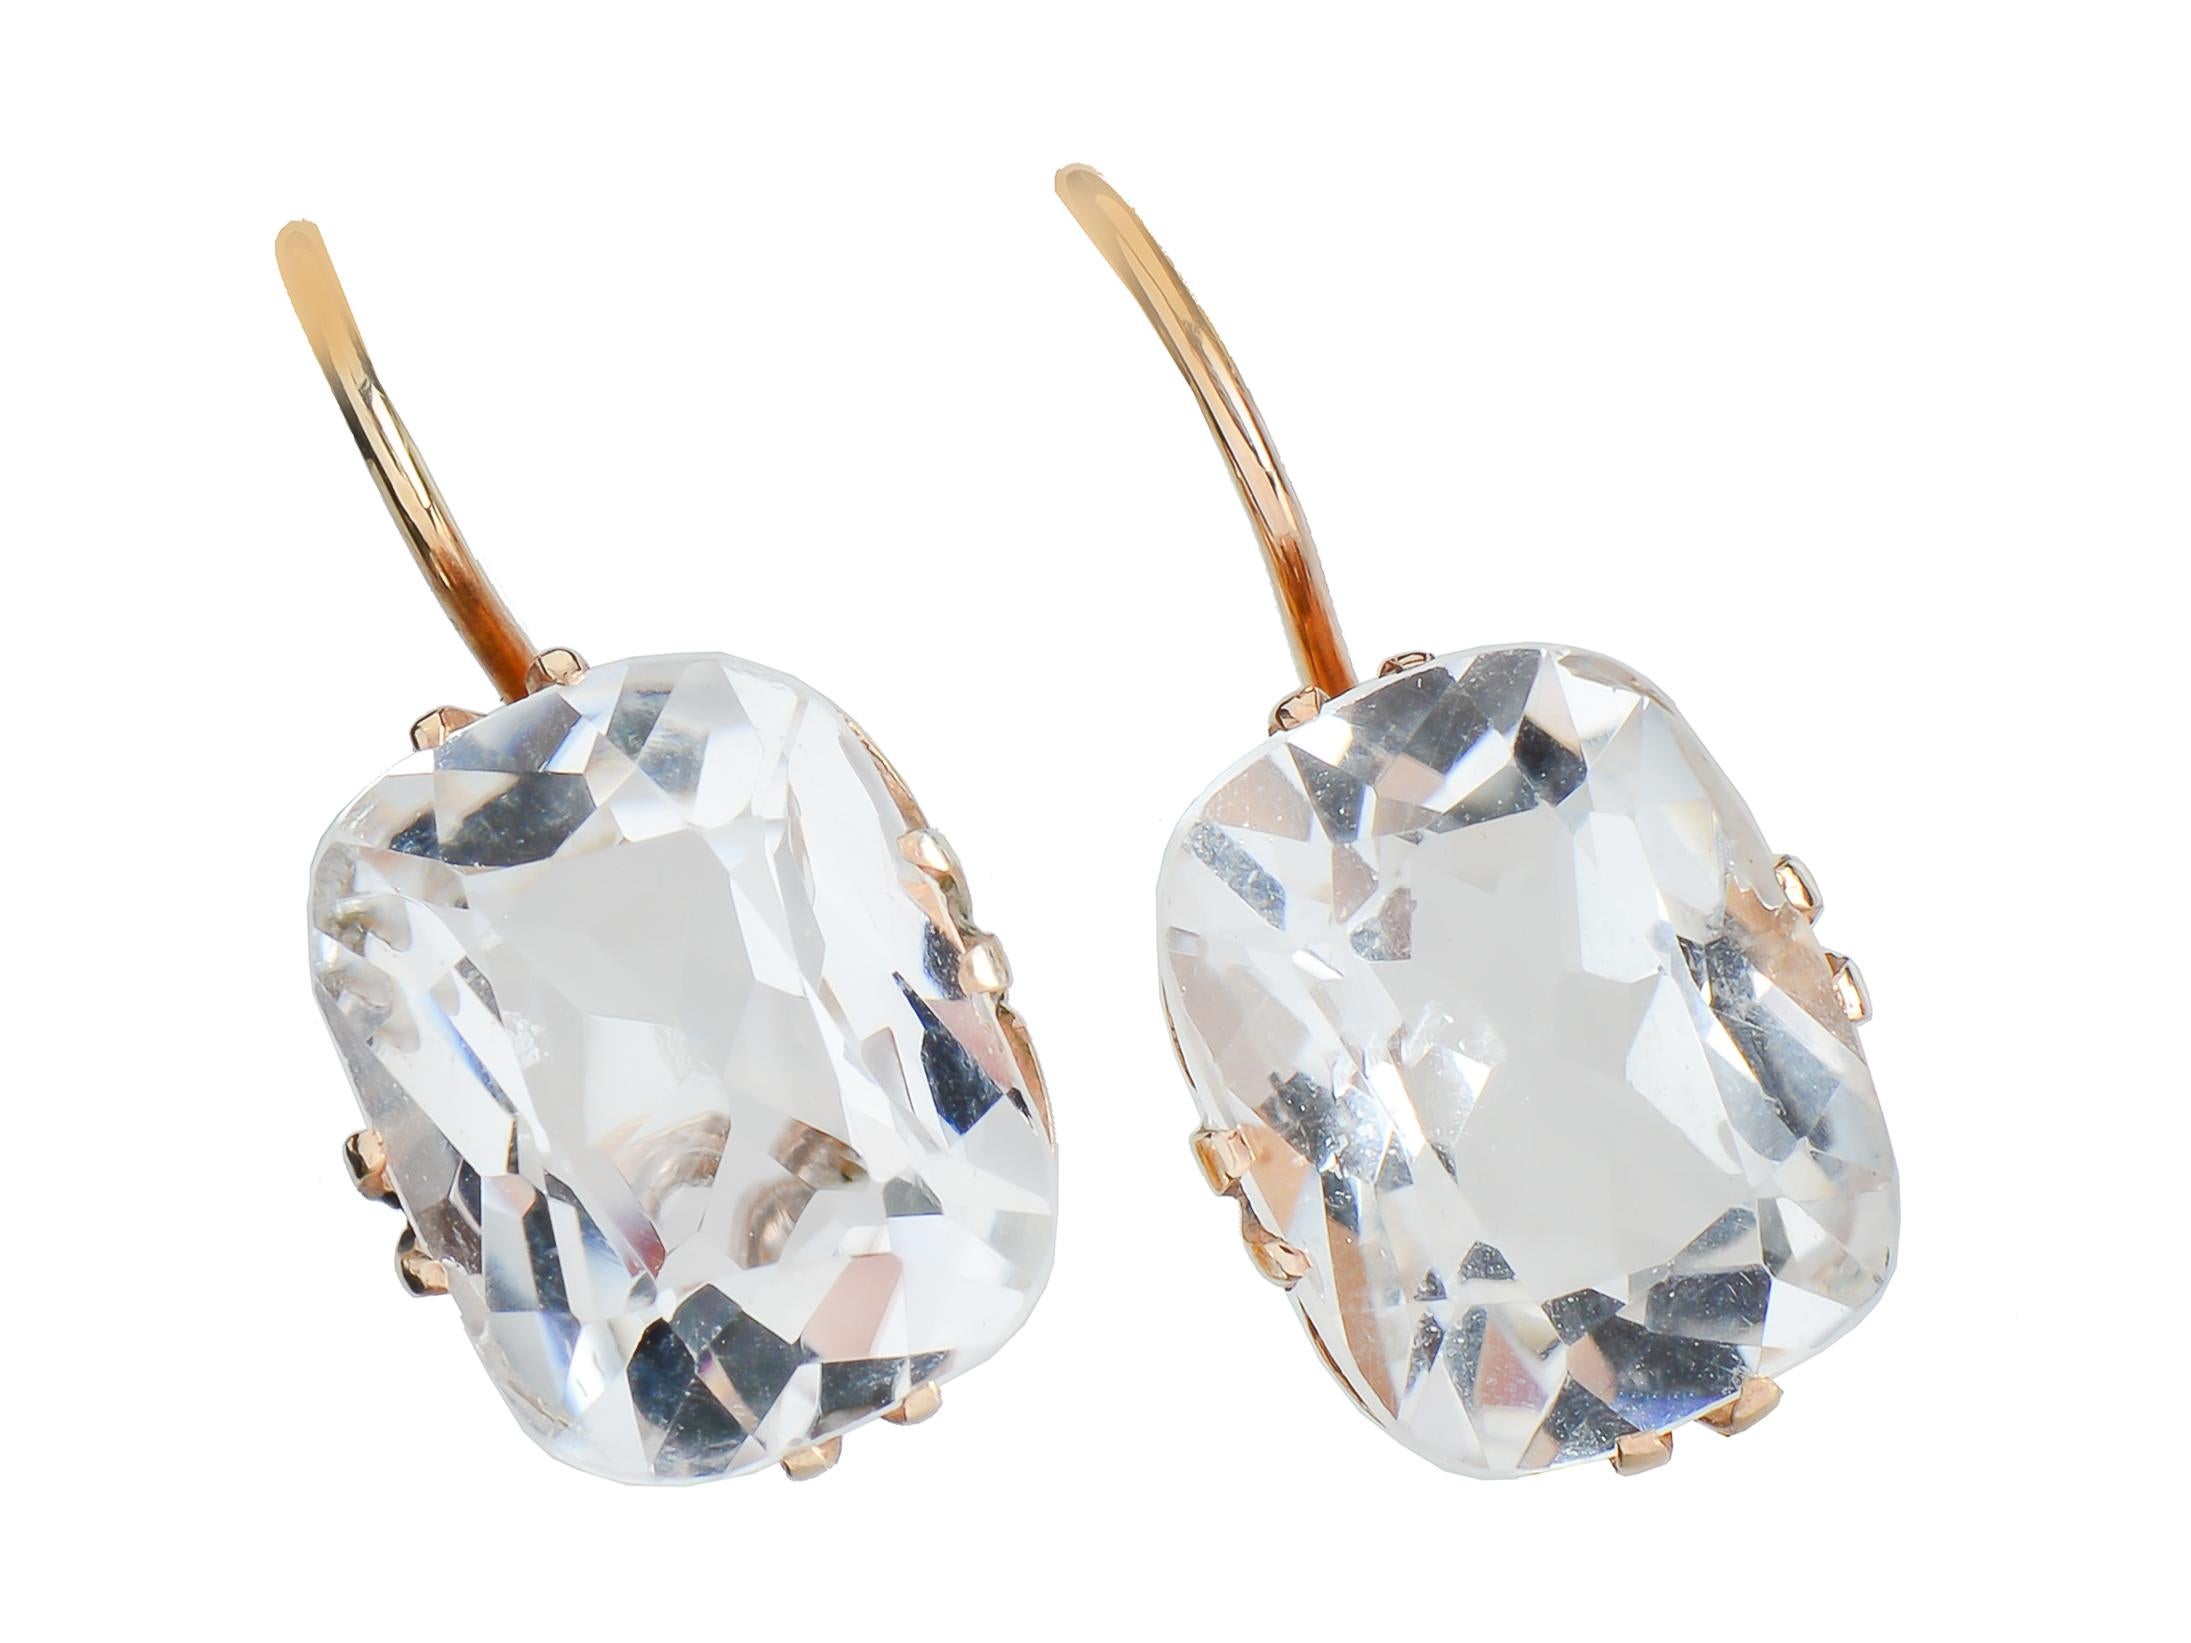 Brilliant 8 Ct. rock crystal earrings, set in 14 Kt gold over, dress up an outfit whether it be denim or evening wear. The crystal is cool, pure and gives a lift to one's spirit. Many sense that crystal has healing and calming properties. The